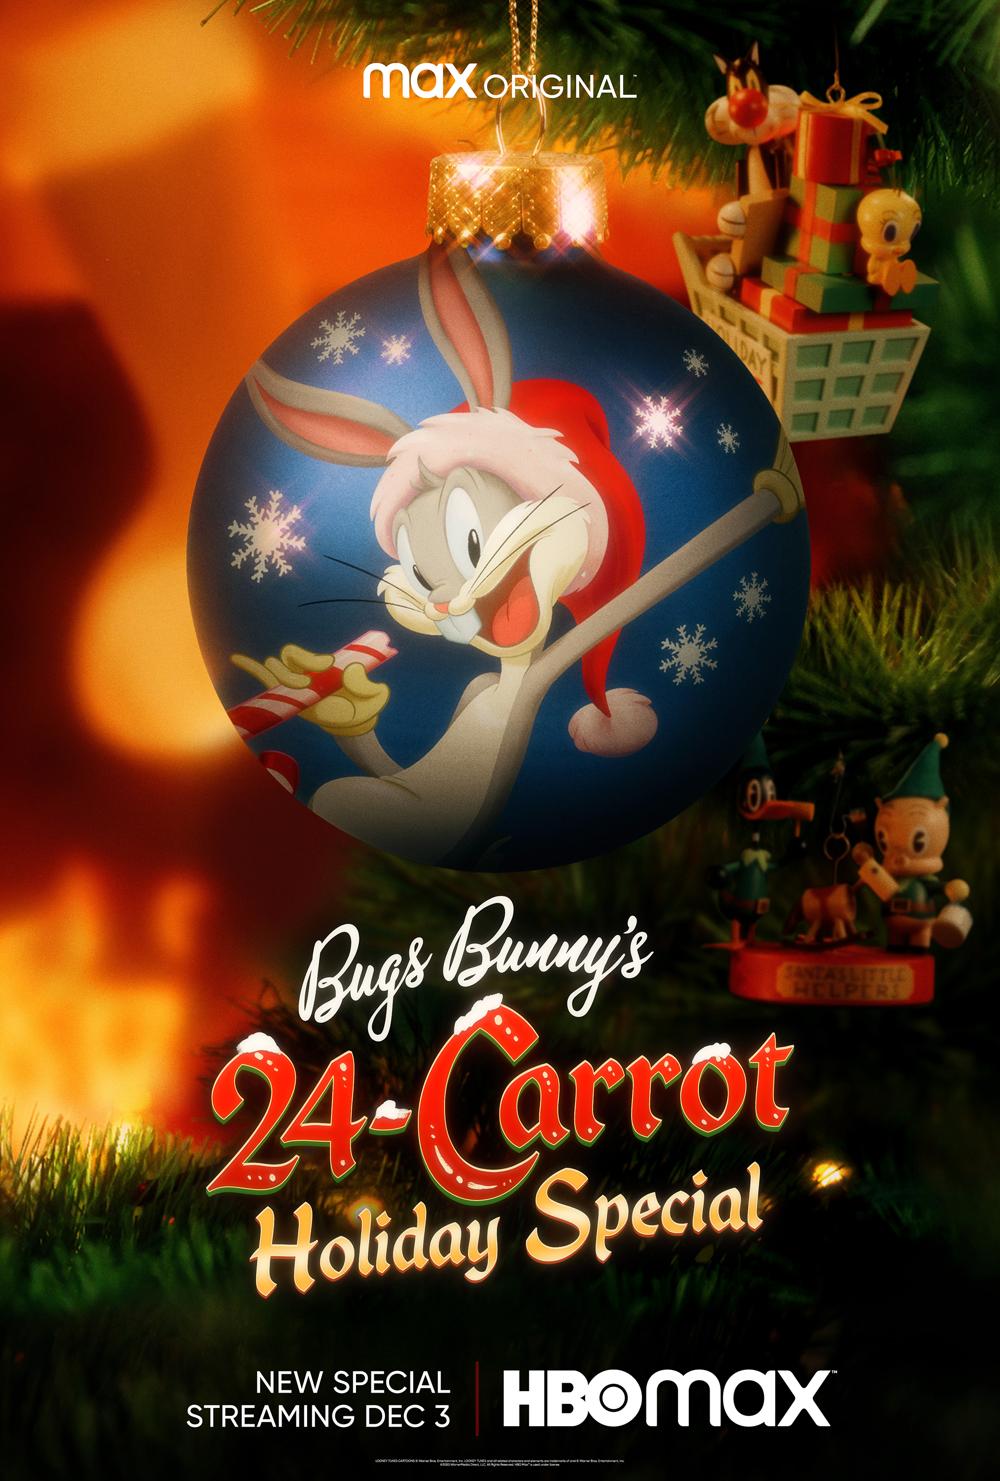 Bugs Bunny's 24-Carot Holiday Special